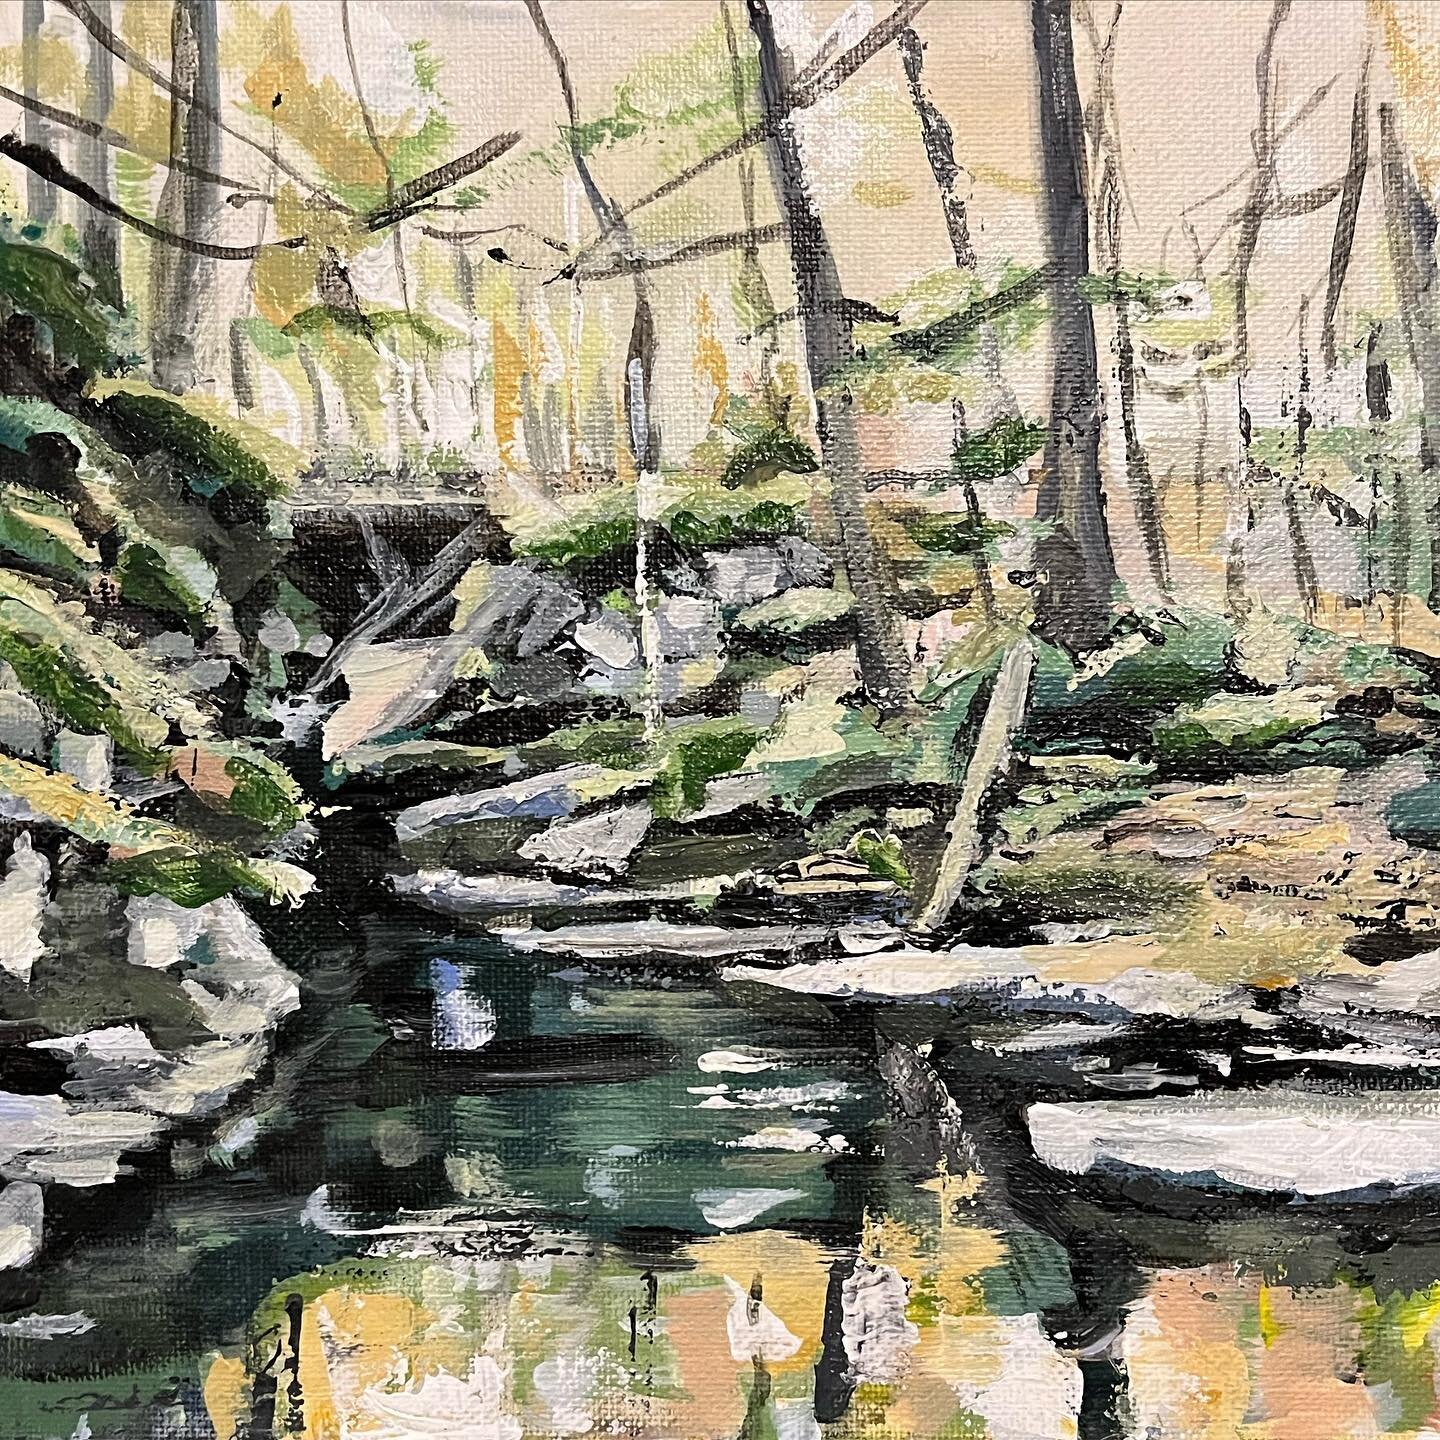 Not sure if this is finished or not, but looking okay so far I think! A little November scene from Rickett&rsquo;s Glen. 

#rickettsglen #rickettsglenstatepark #landscapepainting #landscape #painting #acrylicpainting #waterfalls